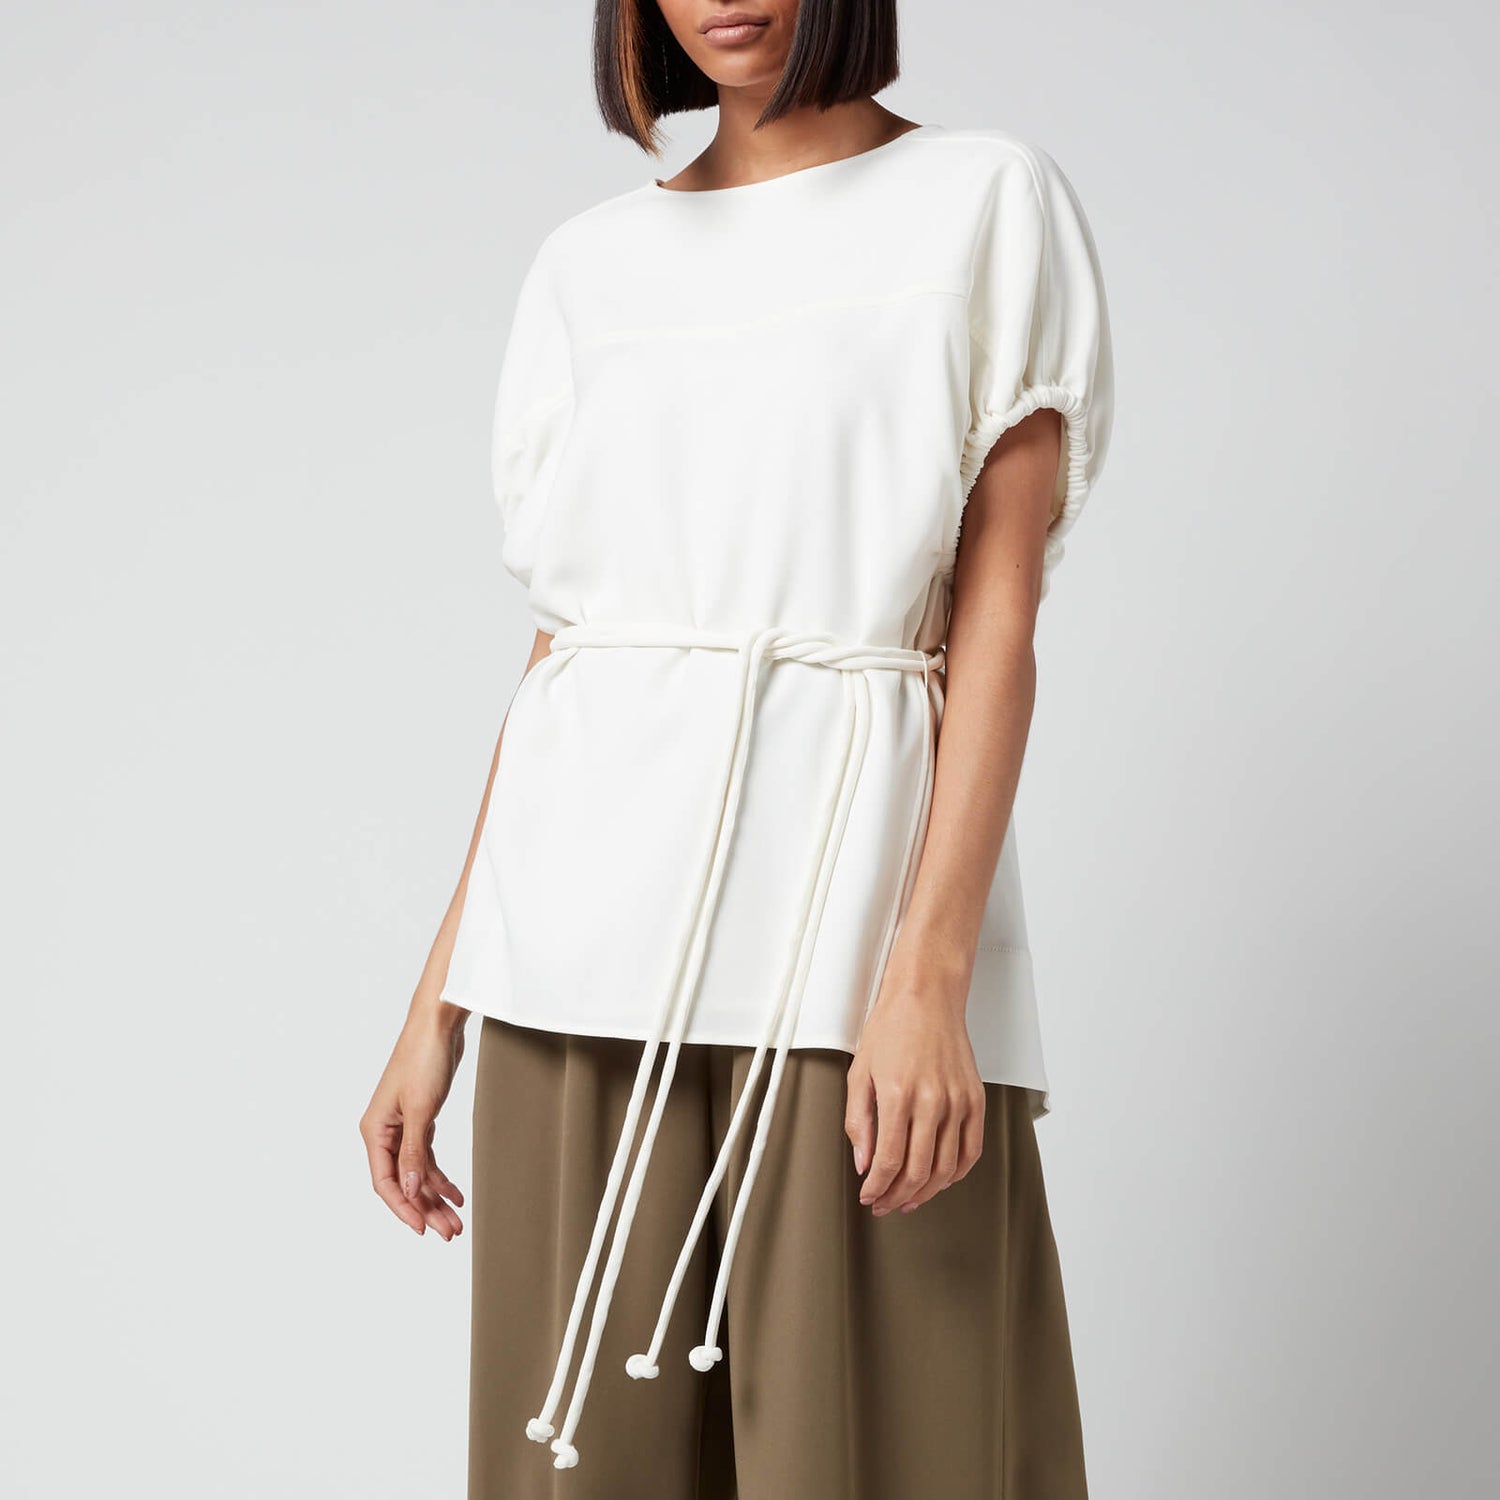 Proenza Schouler Women's Matte Crepe Rounded Sleeve Top - Off White - US 4/UK 8